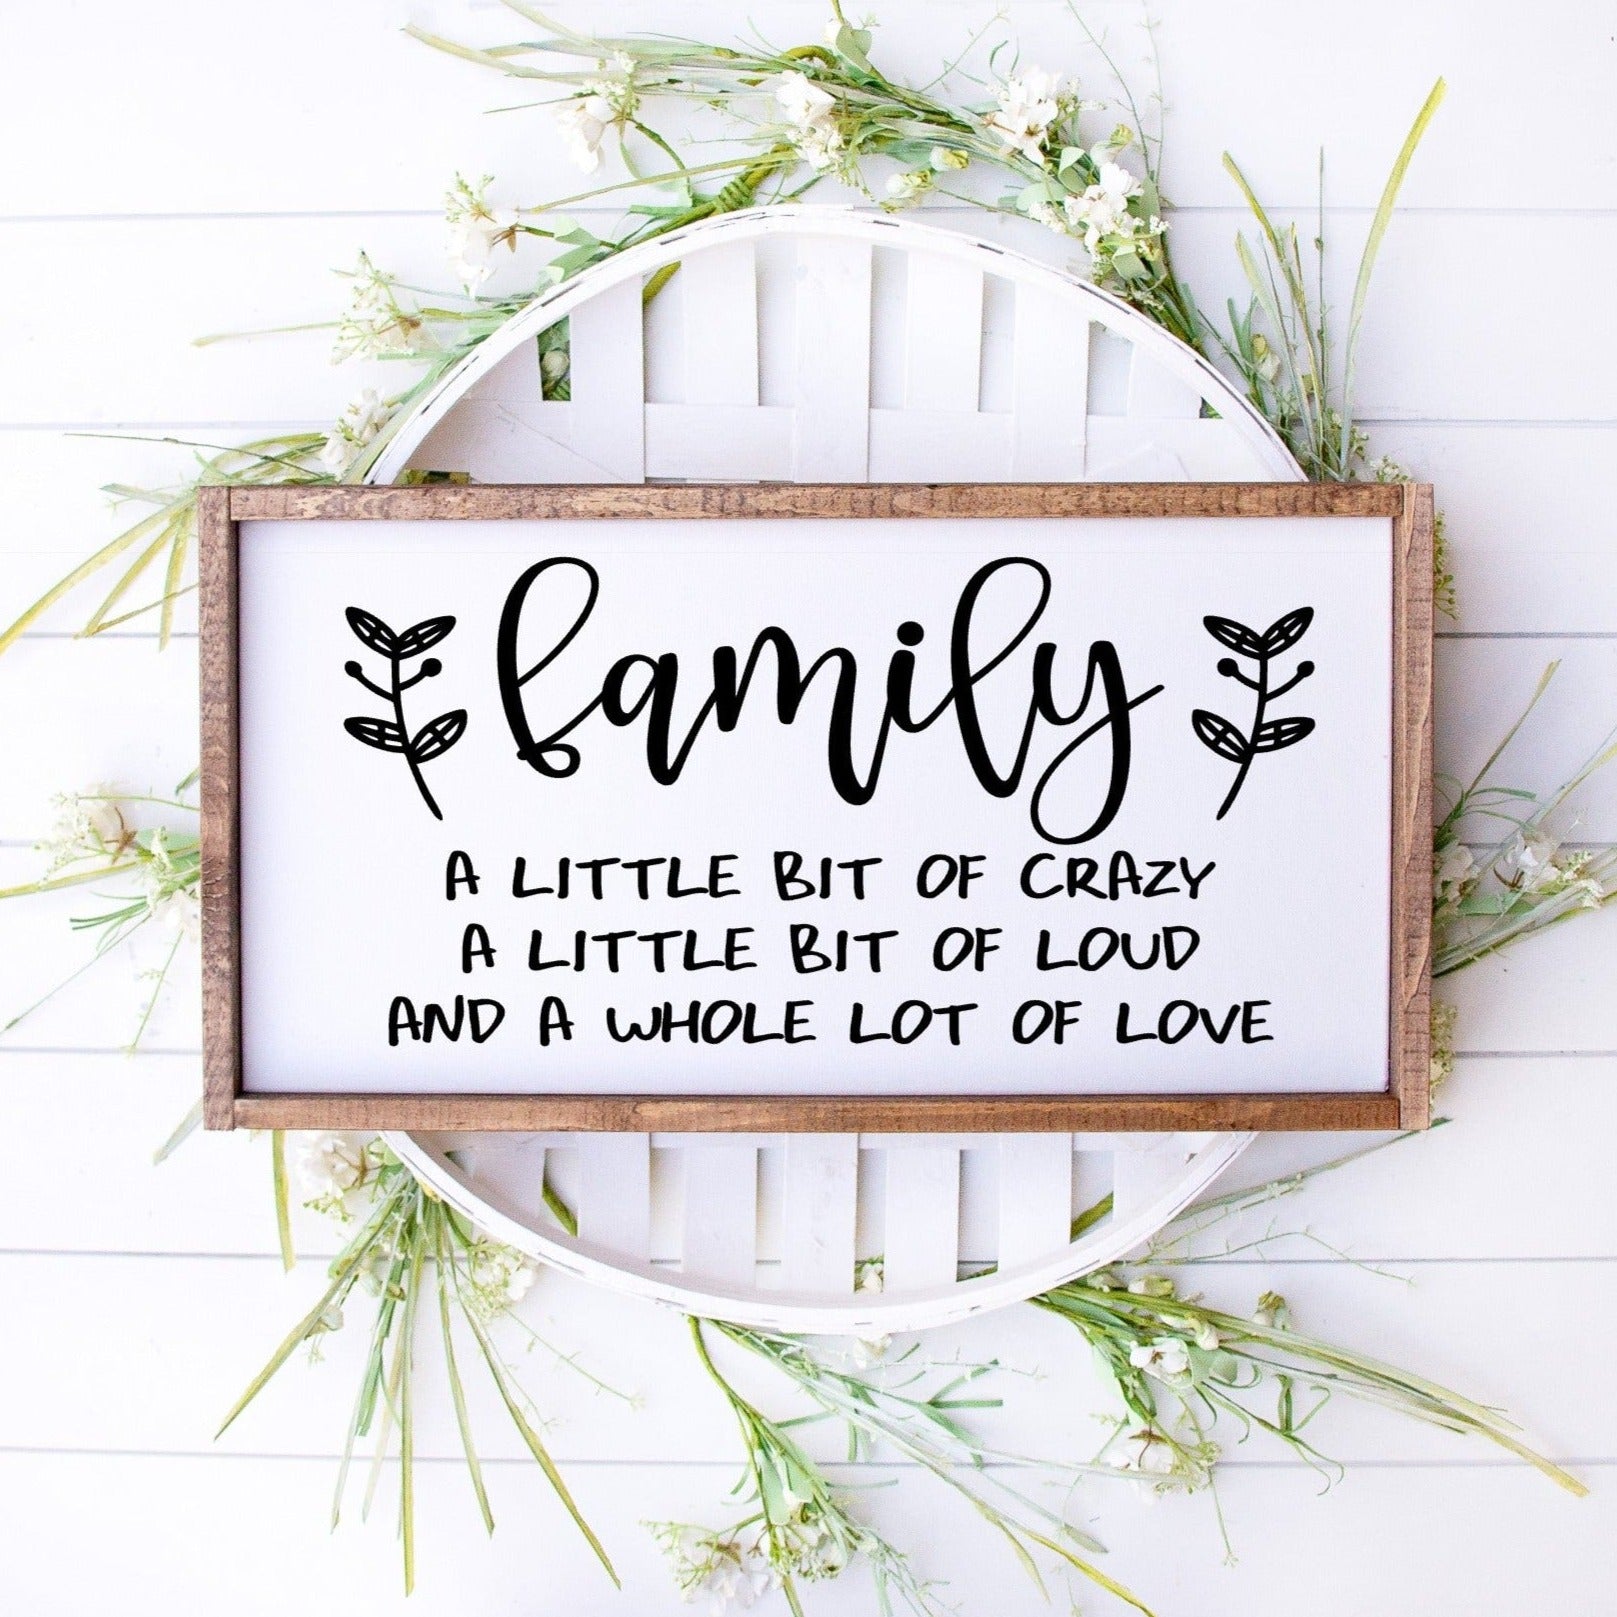 Family a little bit crazy, A little bit of loud and a whole lot of love framed sign white with black letters